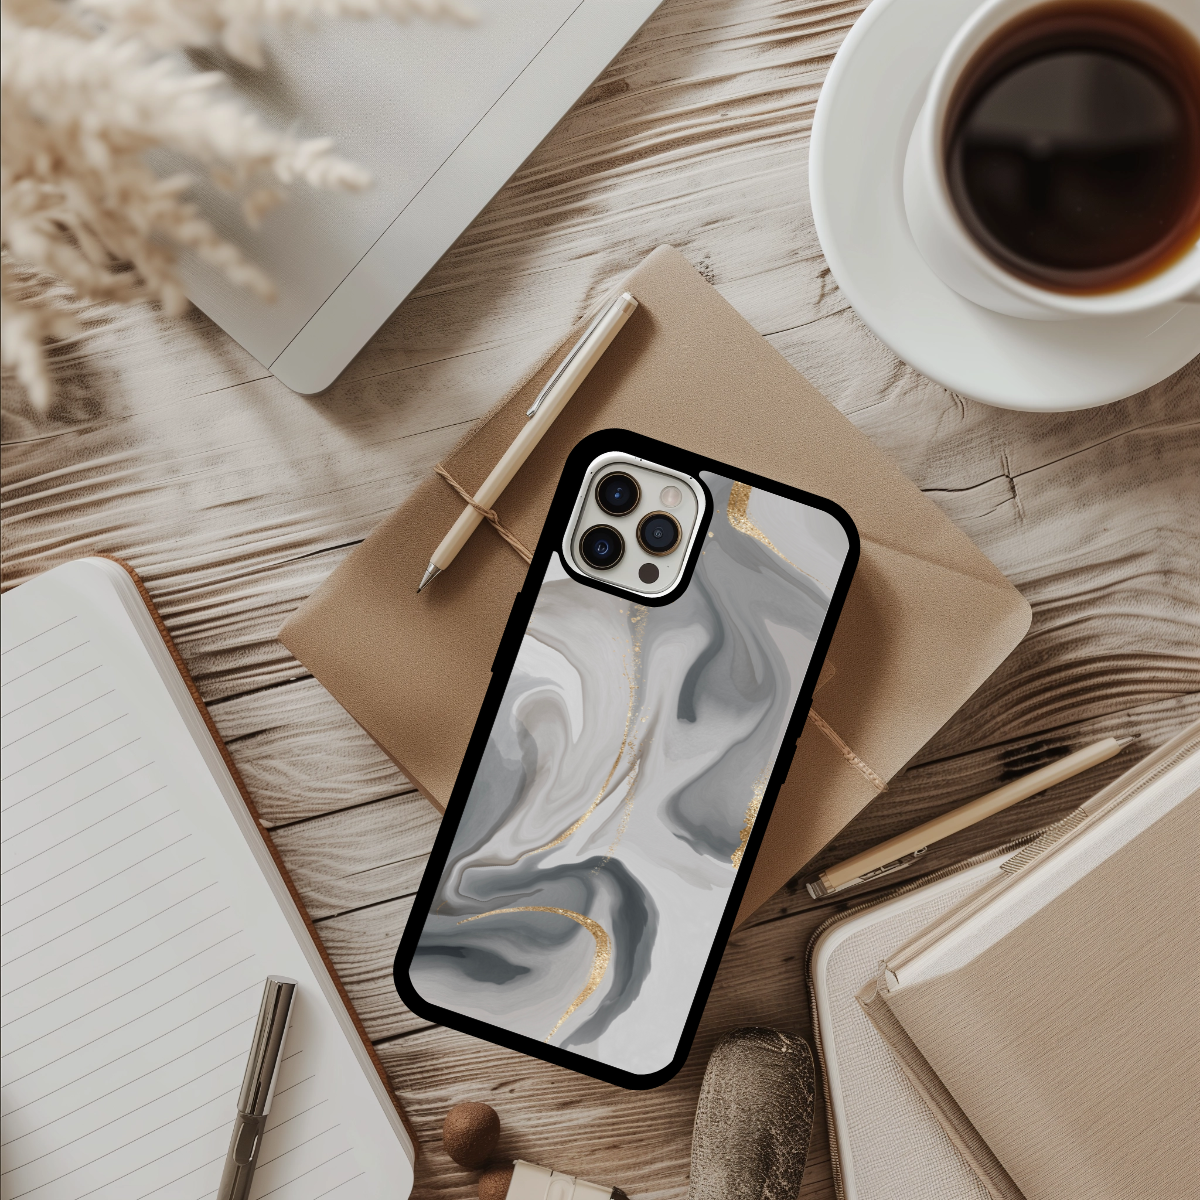 Marble phone case perfect gift for her - cute phone case - best birthday gift - iphone case - girly phone case